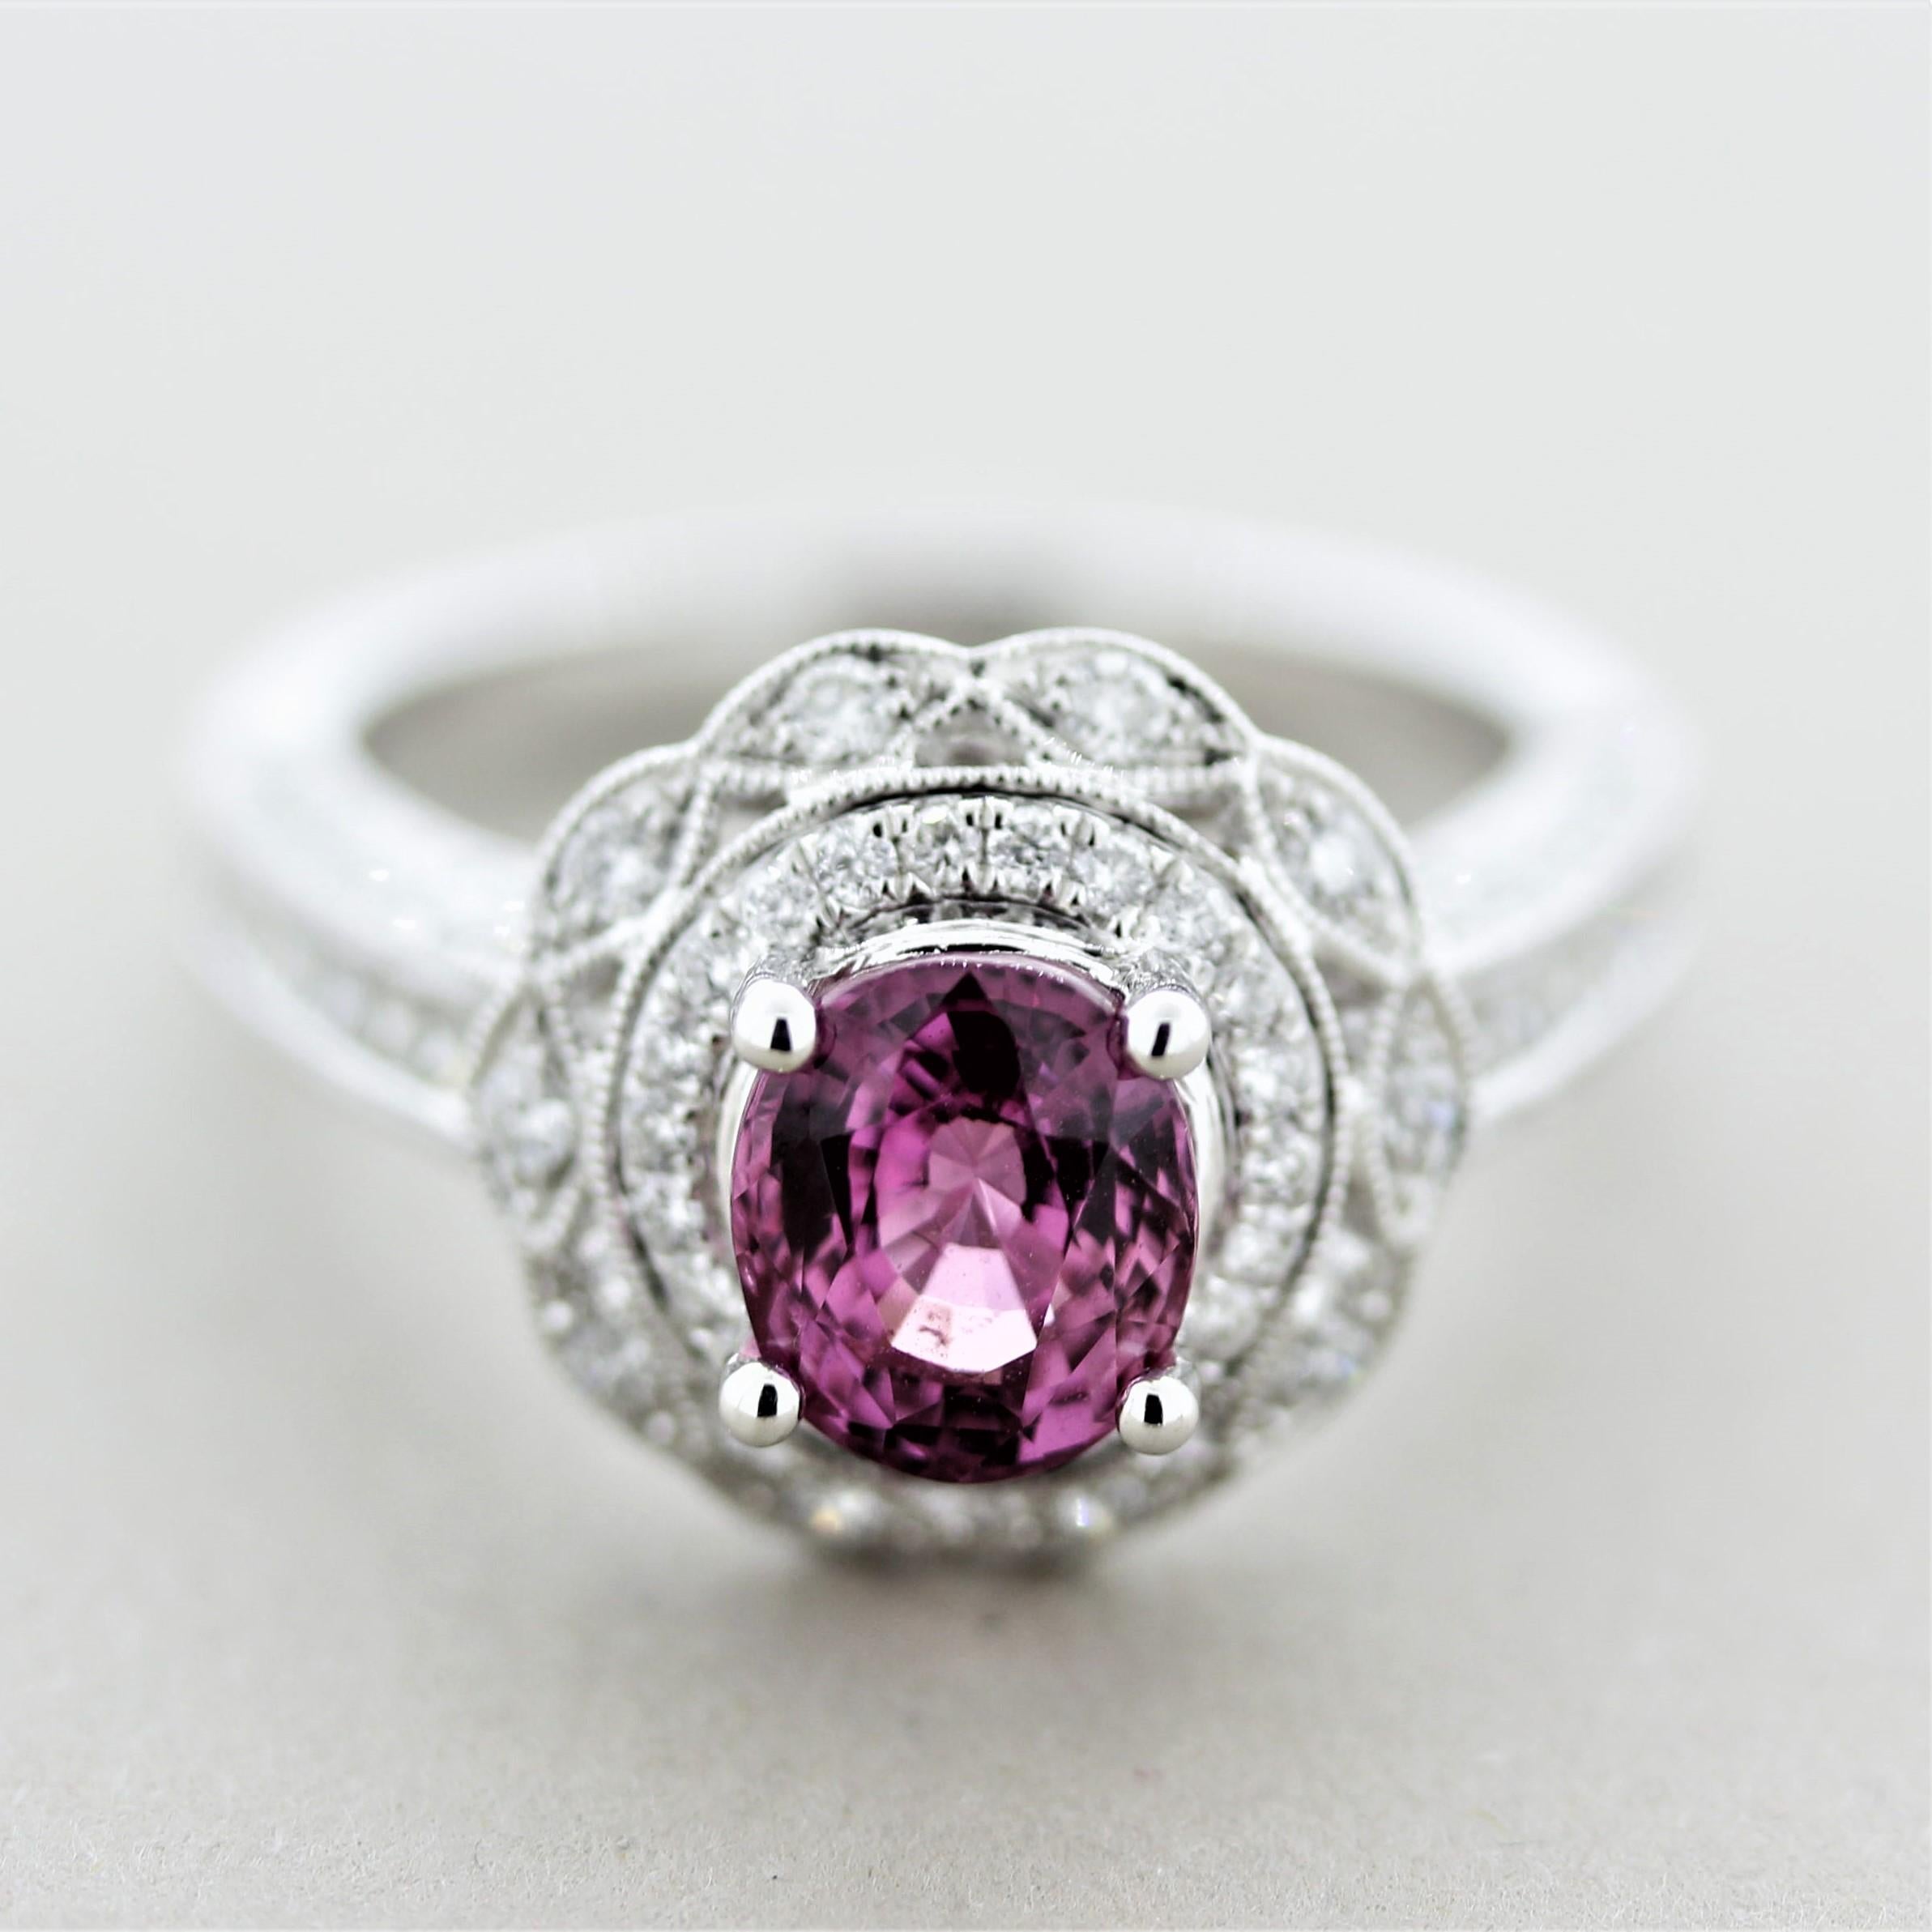 A sweet ring featuring a fine sapphire weighing 2.05 carats with a vivid purplish-pink color and excellent brilliance due to its fine cutting. It is accented by 1.19 carats of round brilliant-cut diamonds set around the sapphire as well as pave-set